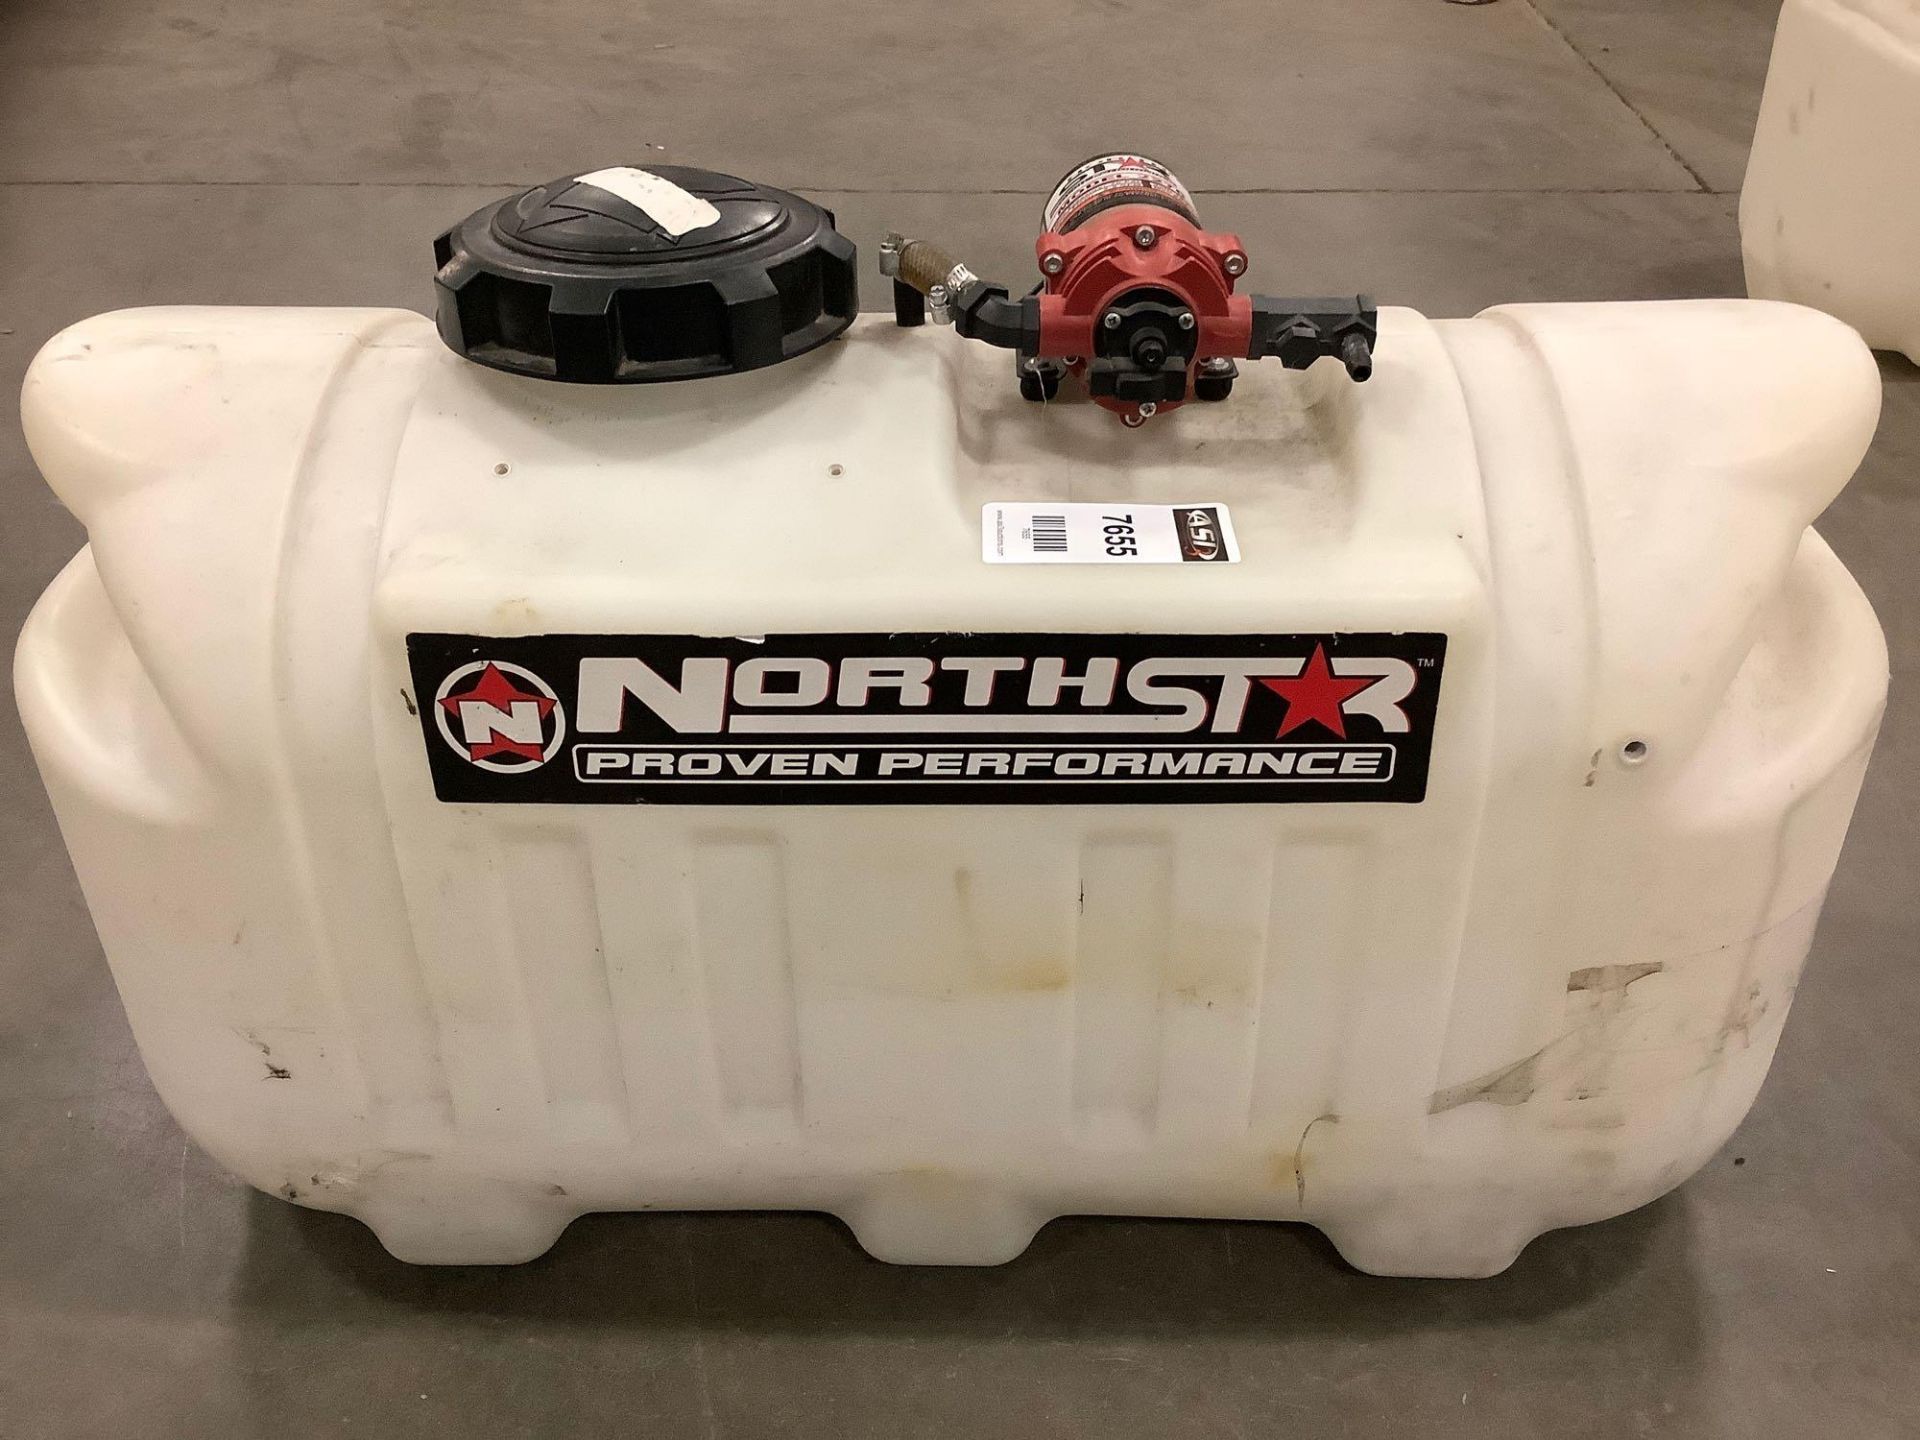 NORTHSTAR PROVEN PERFORMANCE SPRAYER MODEL 2270 WITH APPROX 24 GALLON CAPACITY, 12VDC VOLTS, APPROX - Image 2 of 5